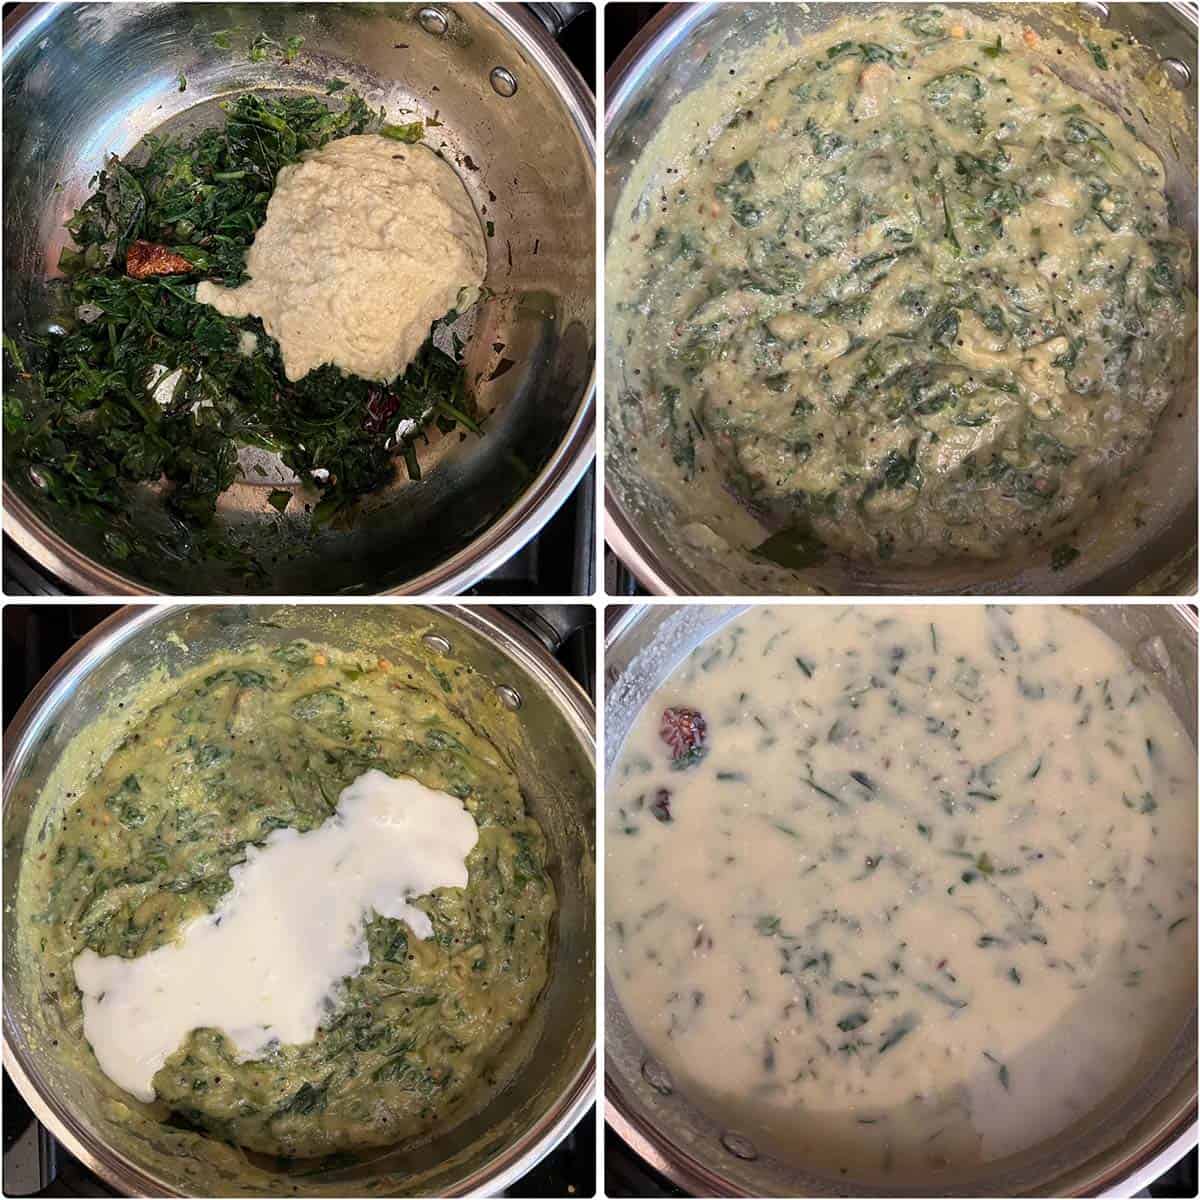 4 panel photo showing the addition of lentil paste and yogurt.